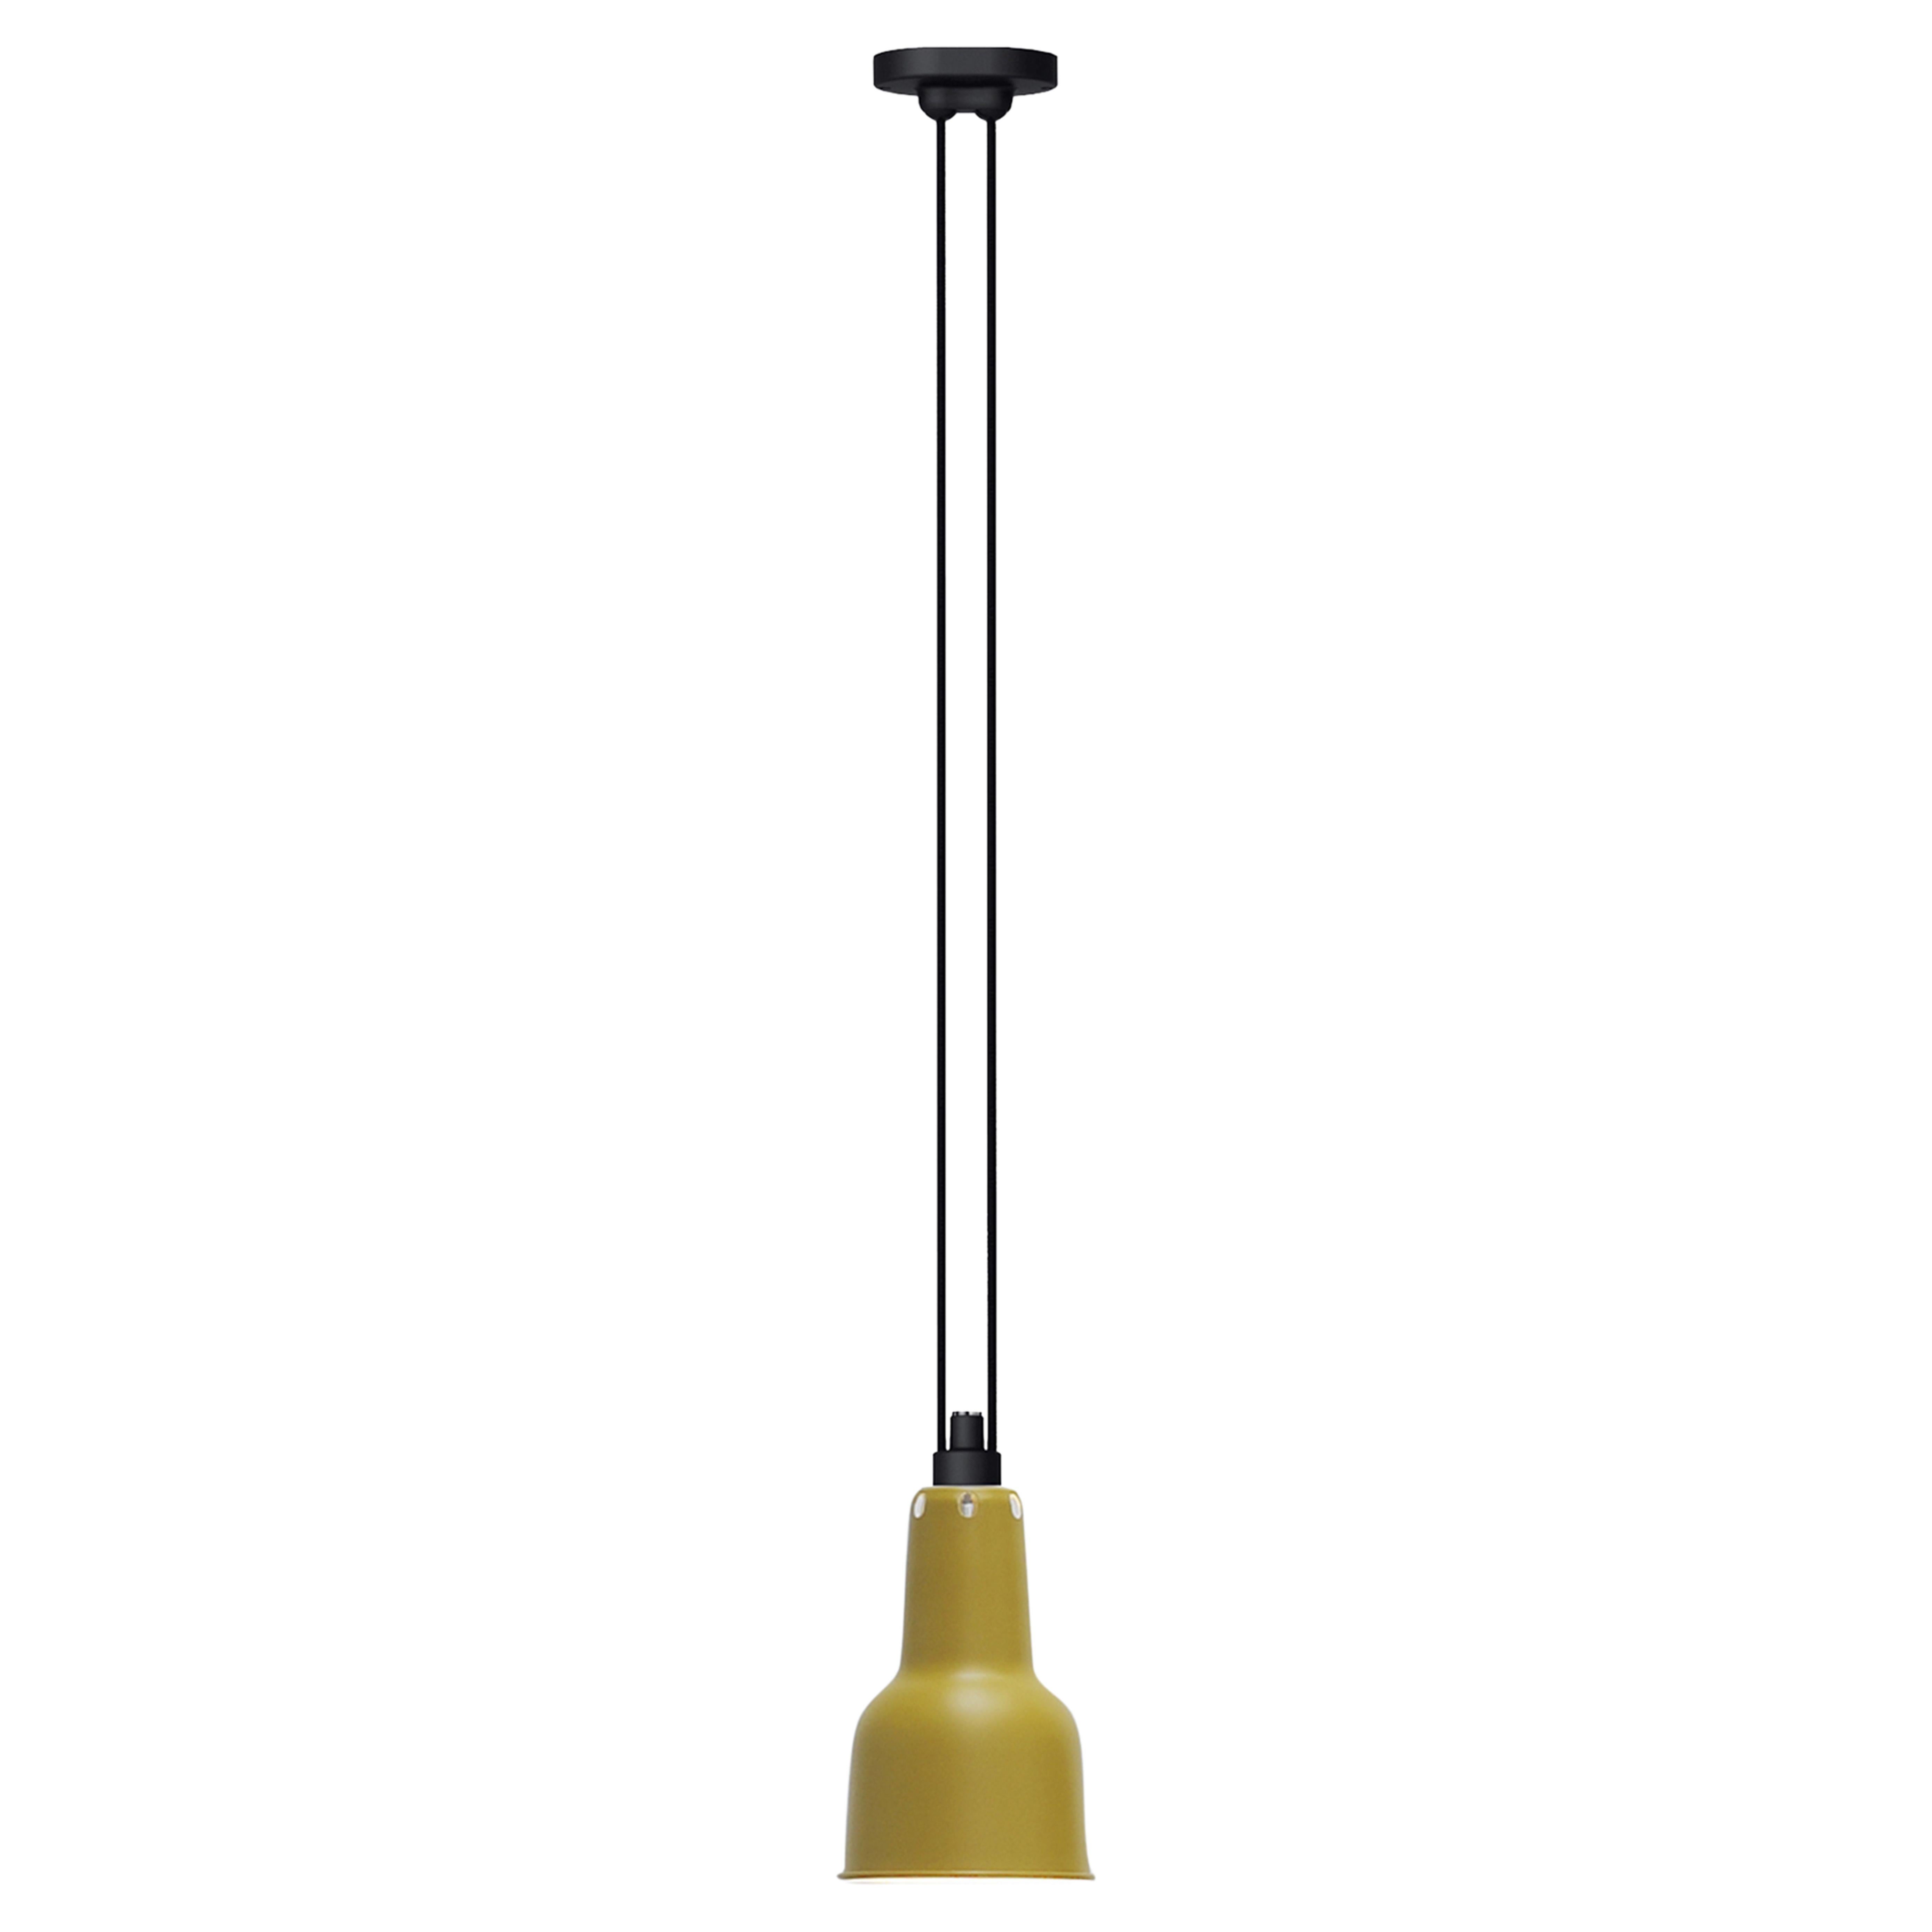 DCW Editions Les Acrobates N°322 Oculist Pendant Lamp in Yellow Shade